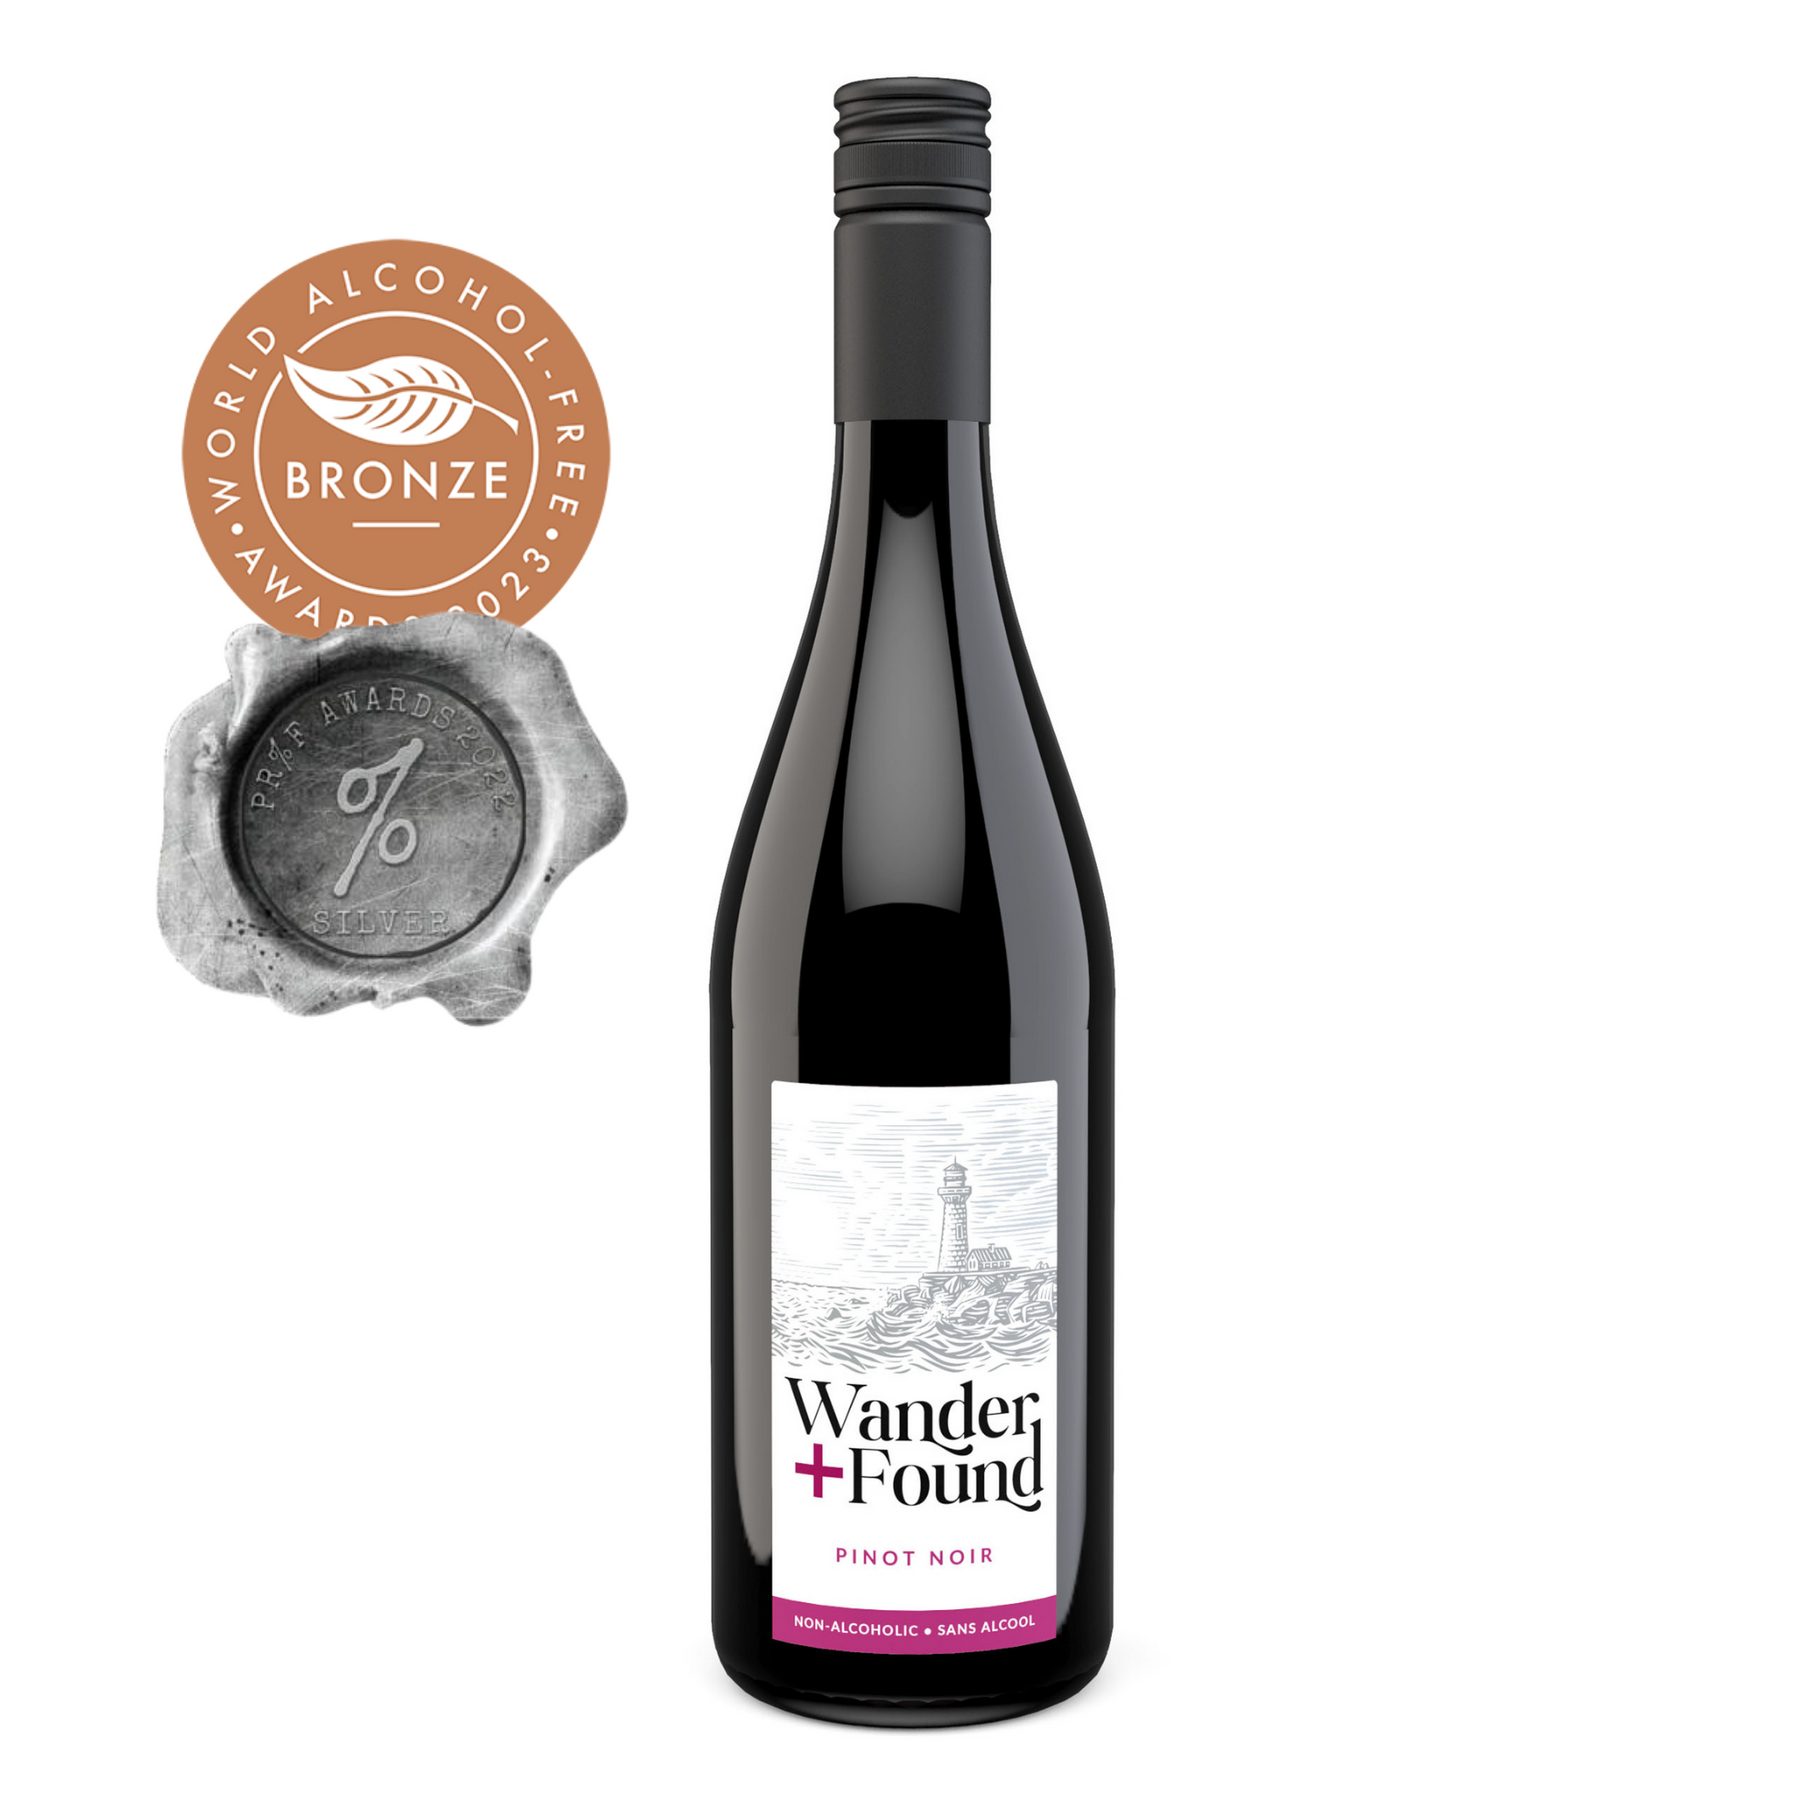 Best Wander PSAlcoholFree Dealcoholized wine Pinot Found - Noir Wine Red –